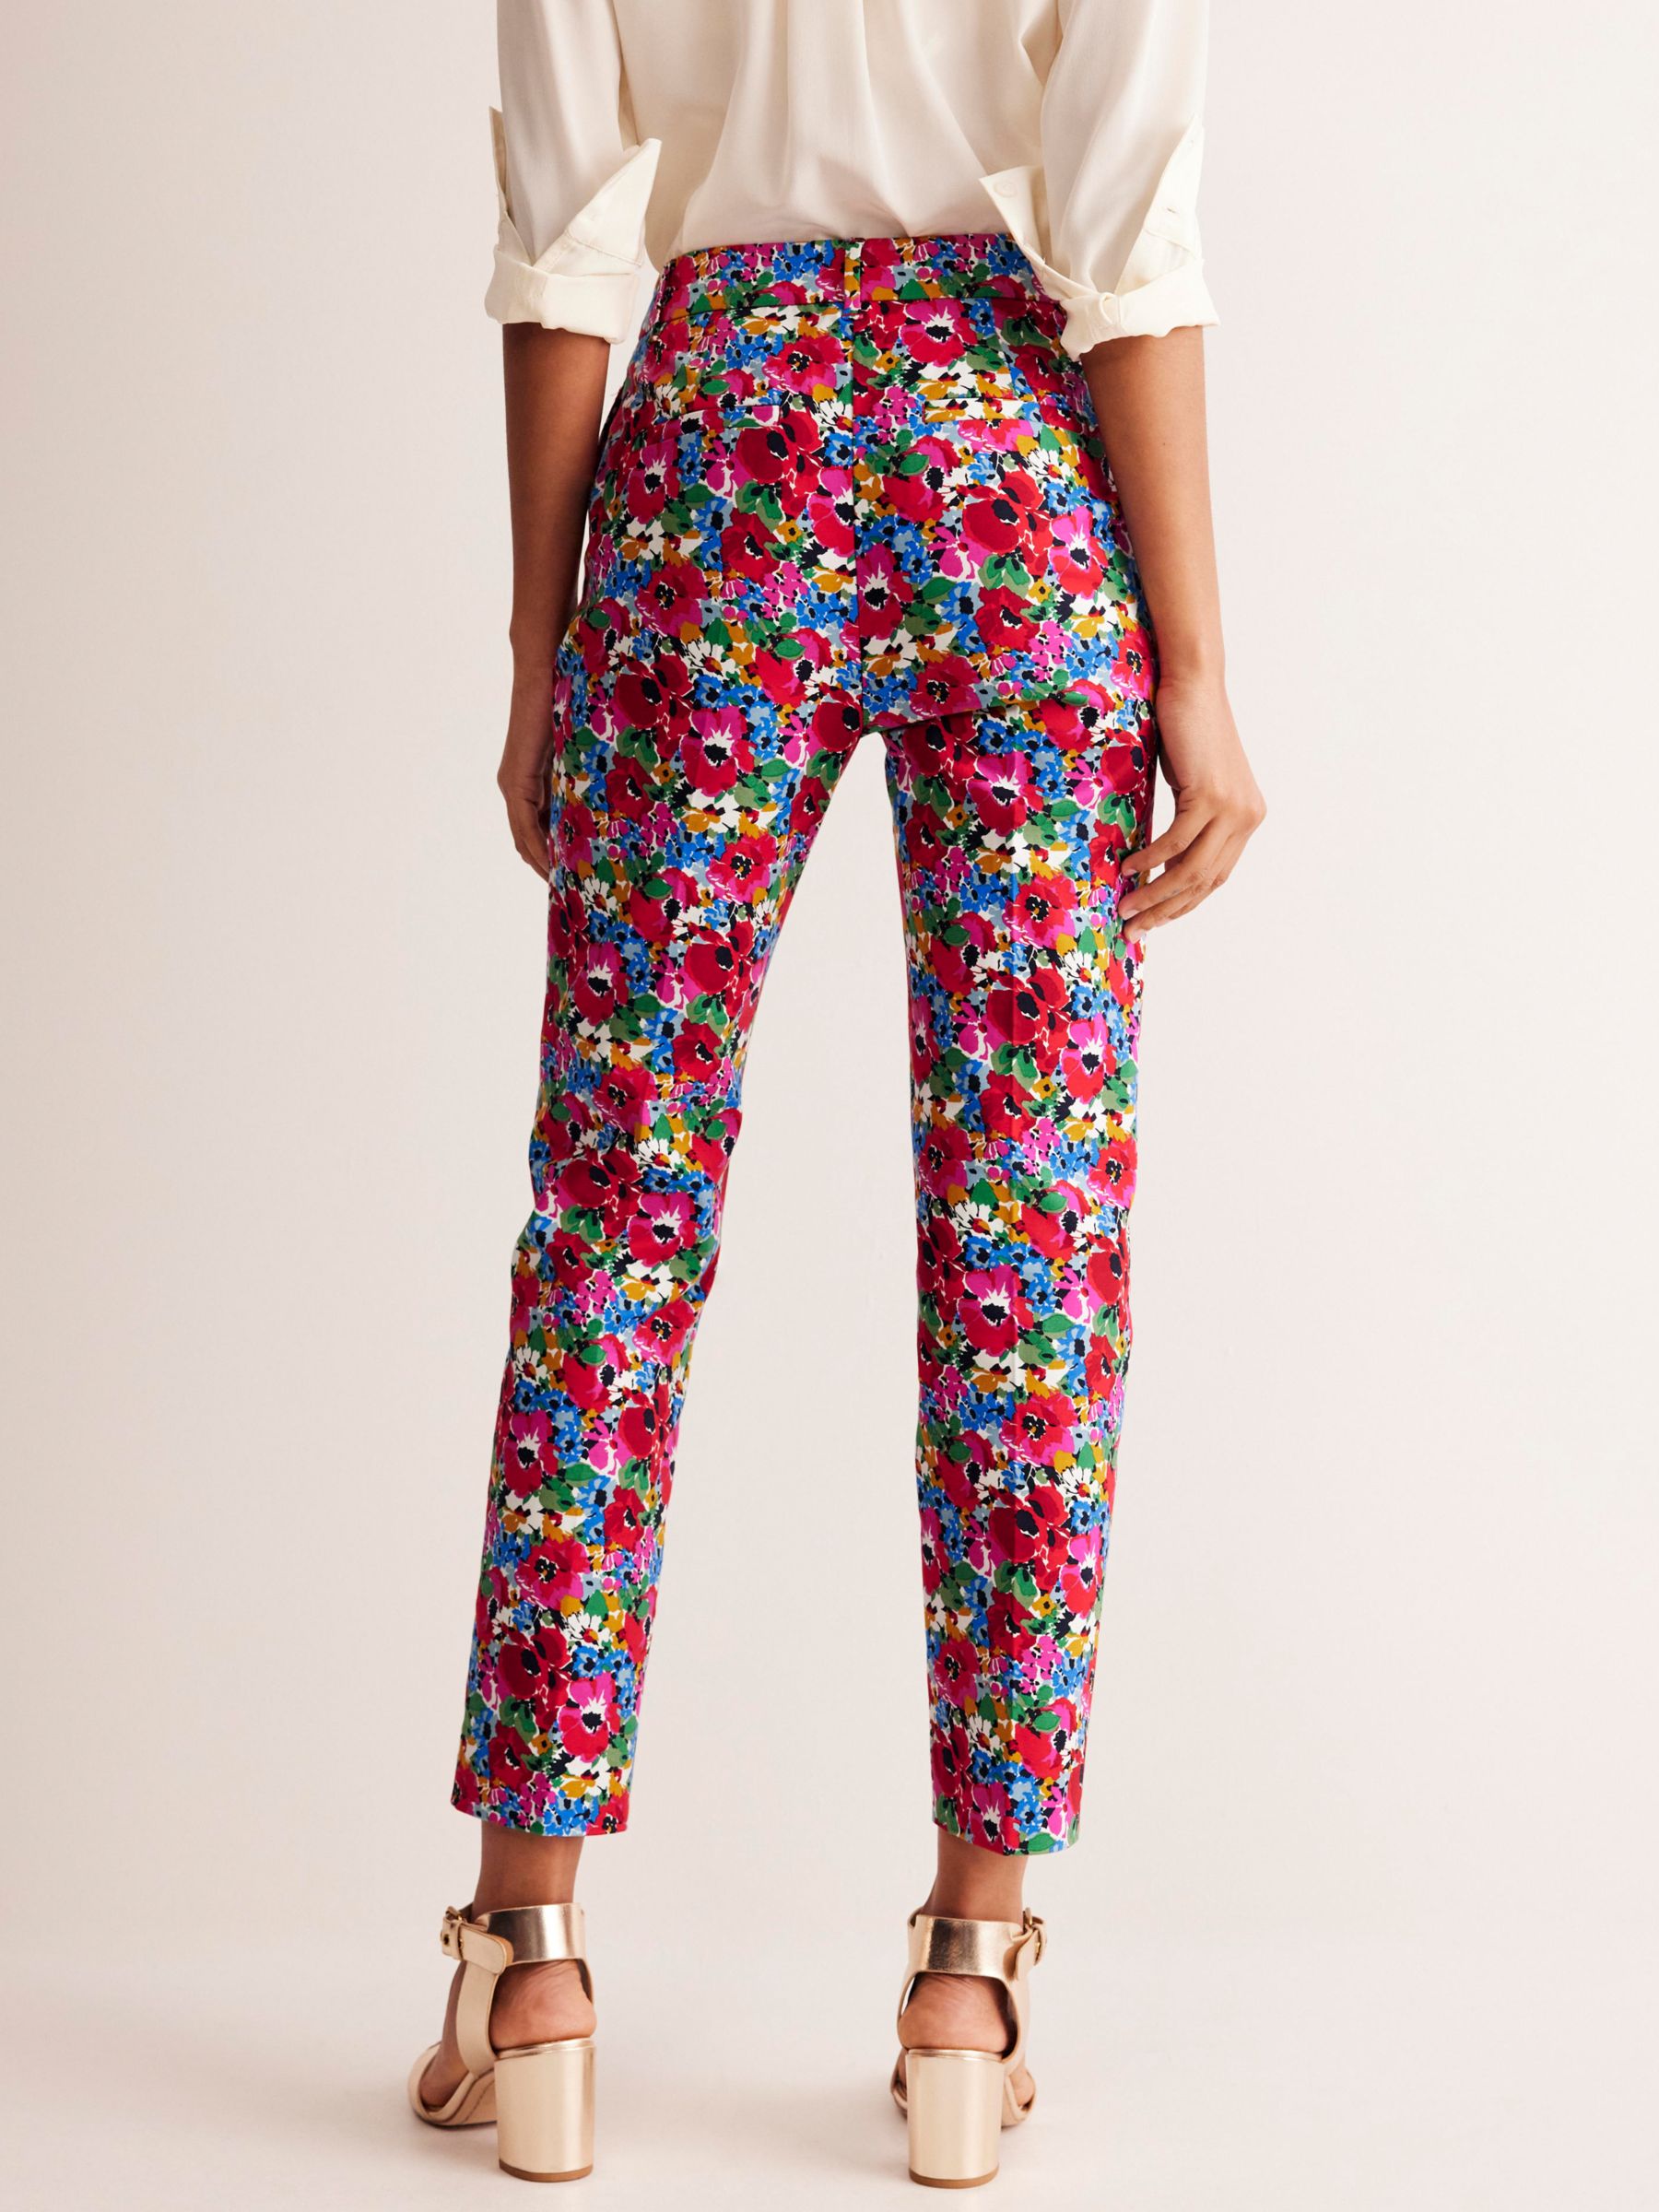 Boden Highgate Wild Poppy Sateen Floral Tailored Trousers, Multi, 8